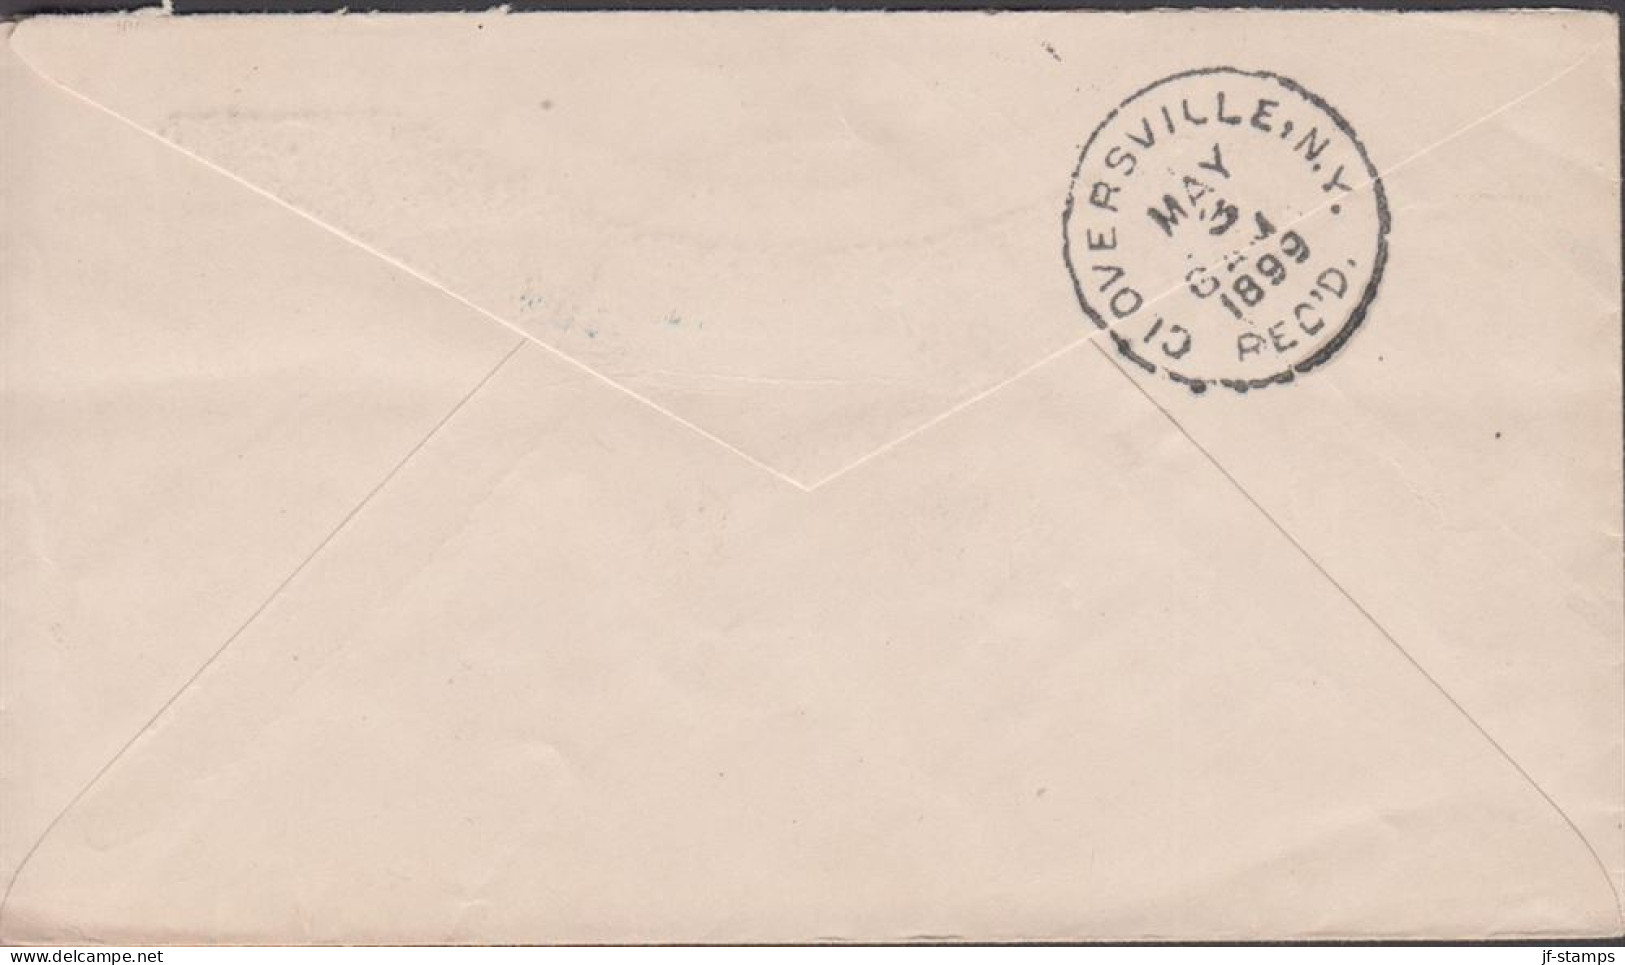 1899. CANADA, Victoria. 2 CENTS On Cover To Cloversville, USA Cancelled WINNIPIG 7 AP 29 99 CA... (Michel 64) - JF439376 - Storia Postale